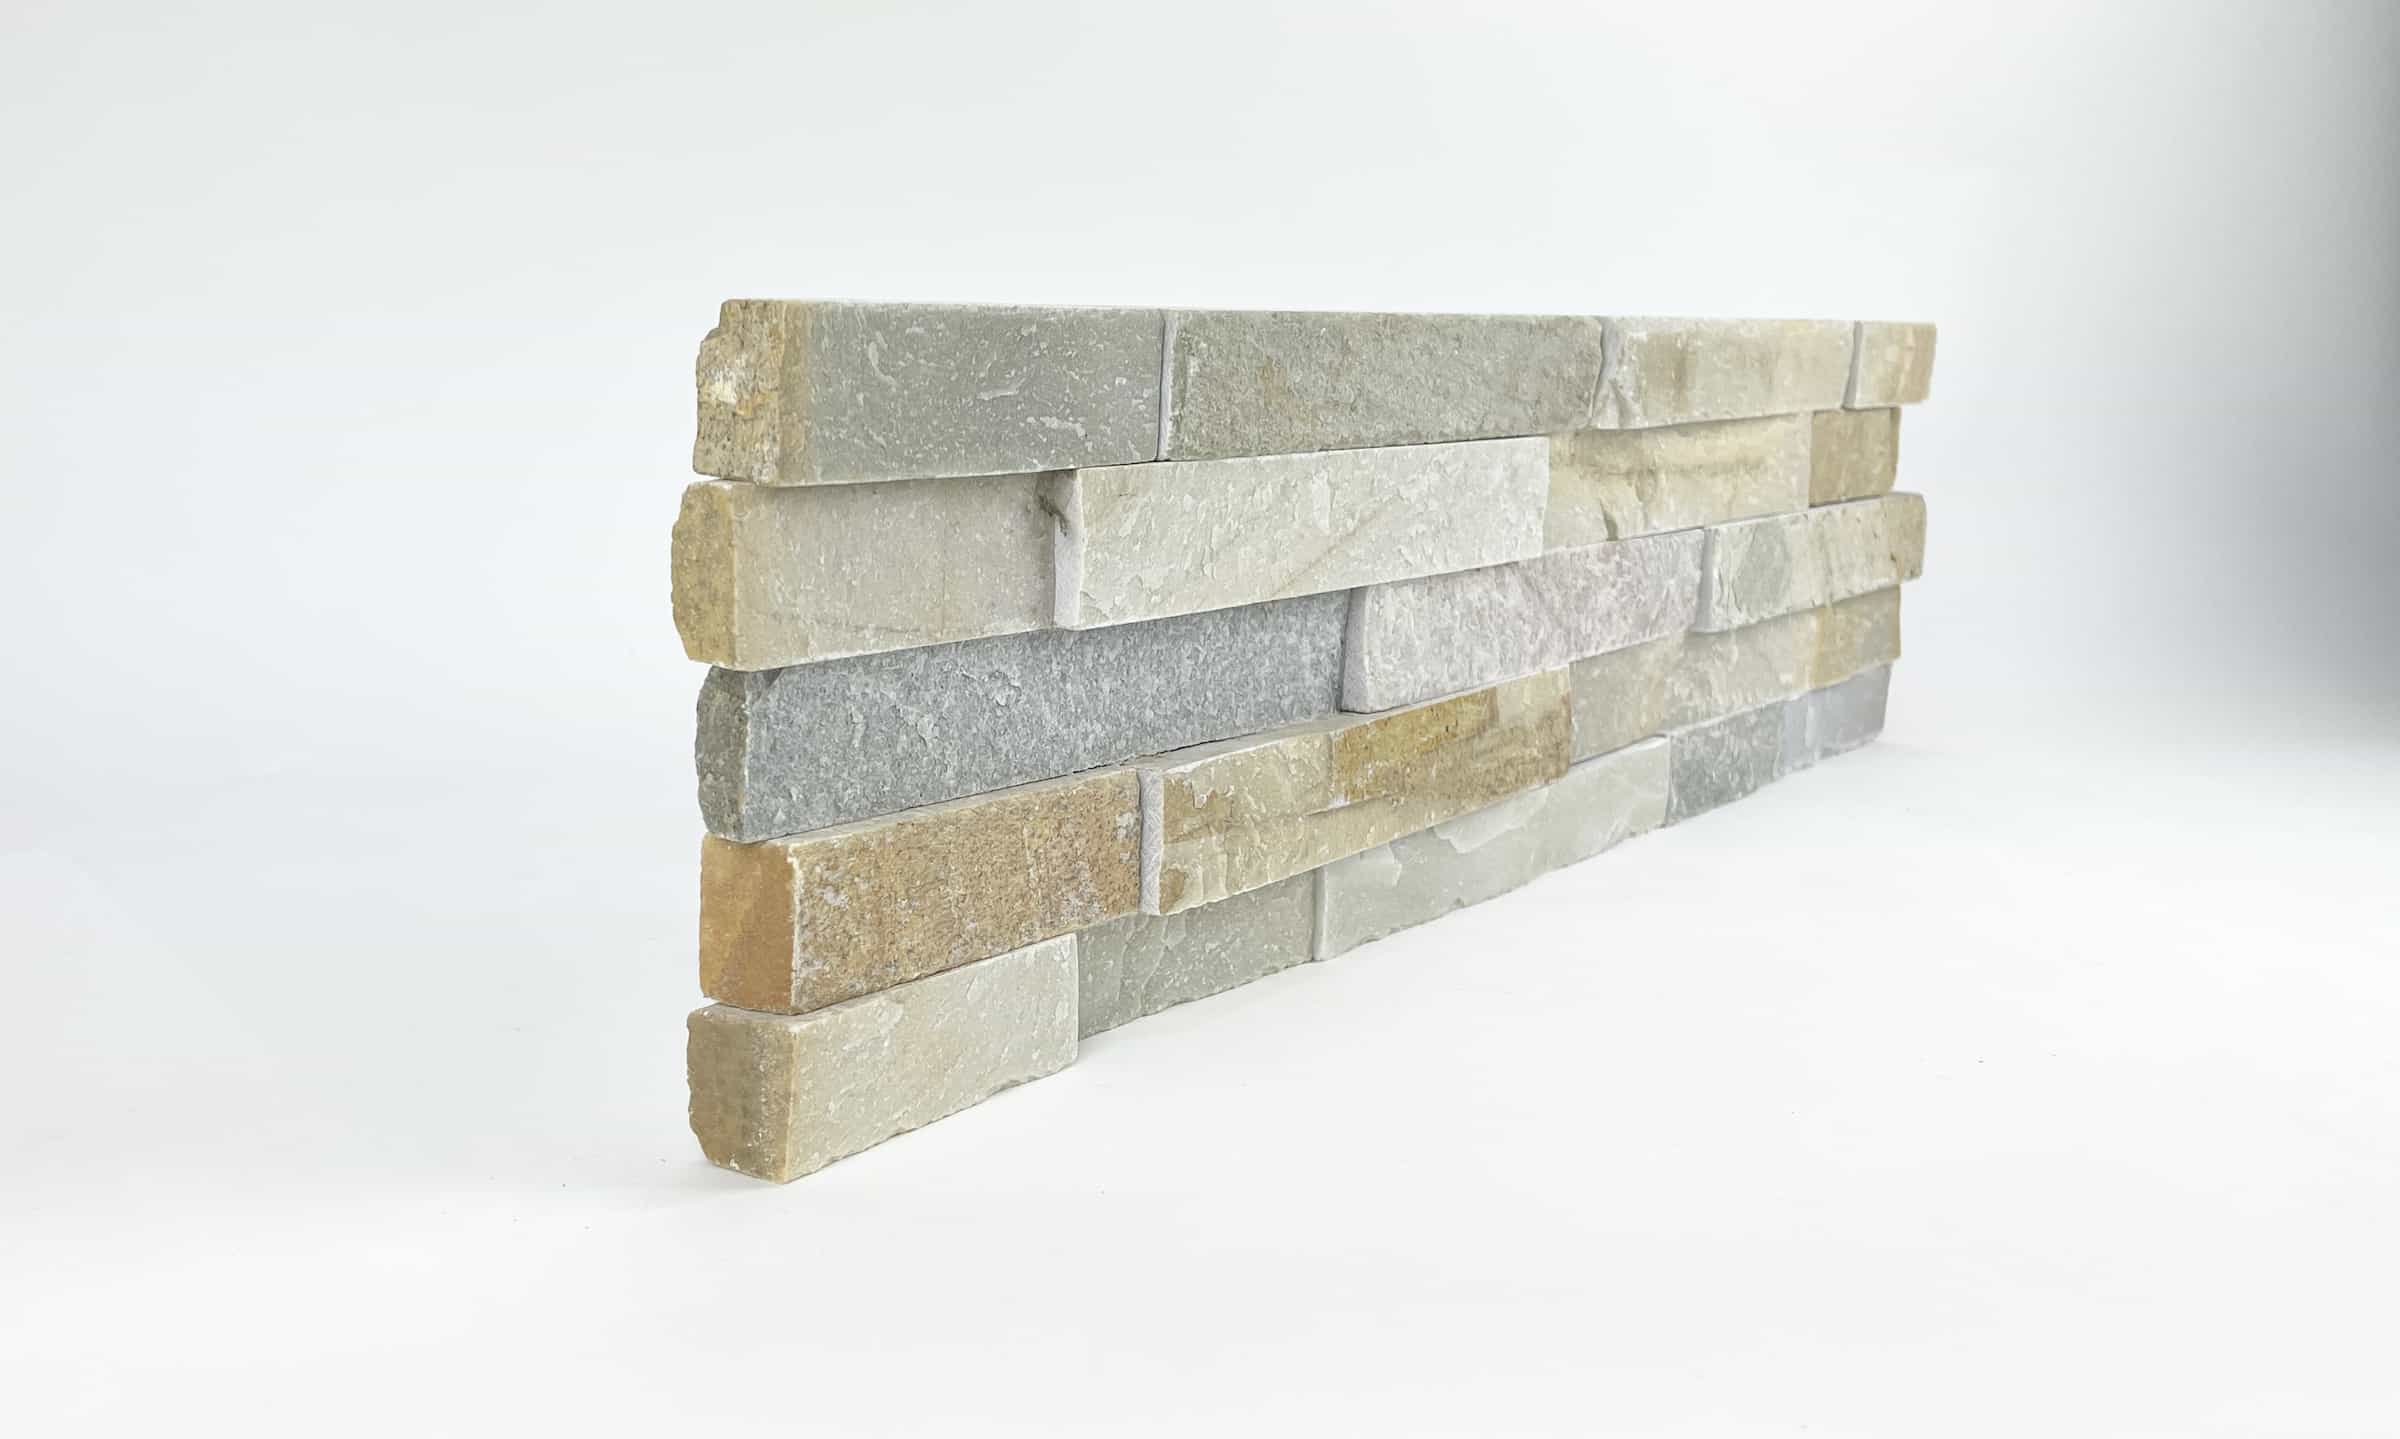 Realstone Sierra Shadow natural stone veneer panel with finished end used for fireplaces and stone exterior